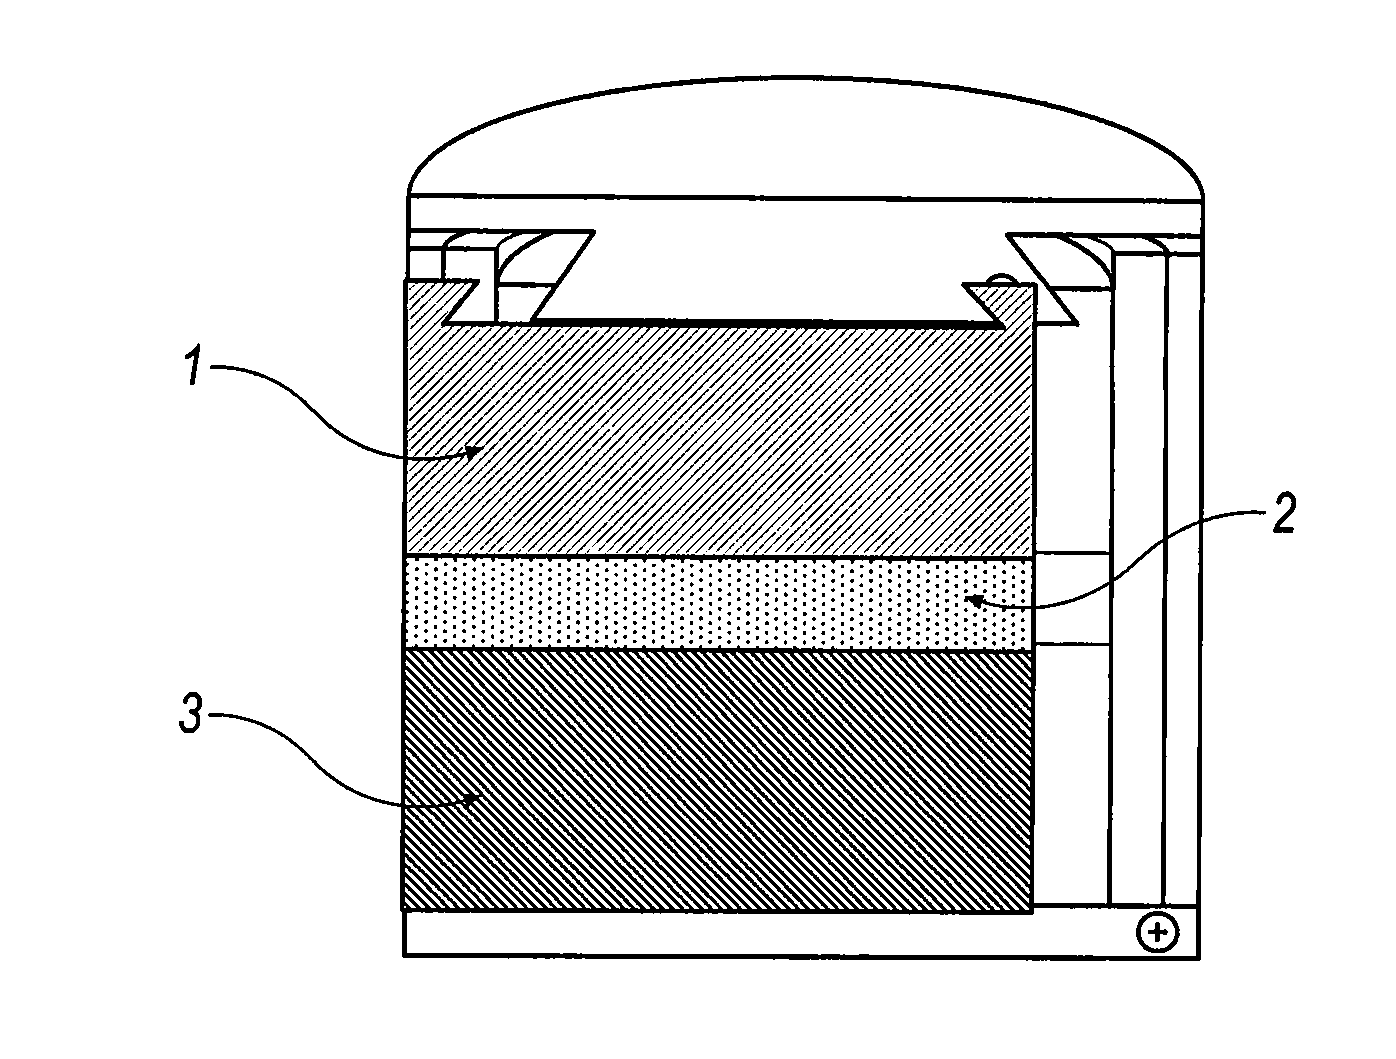 Molten metal rechargeable electrochemical cell